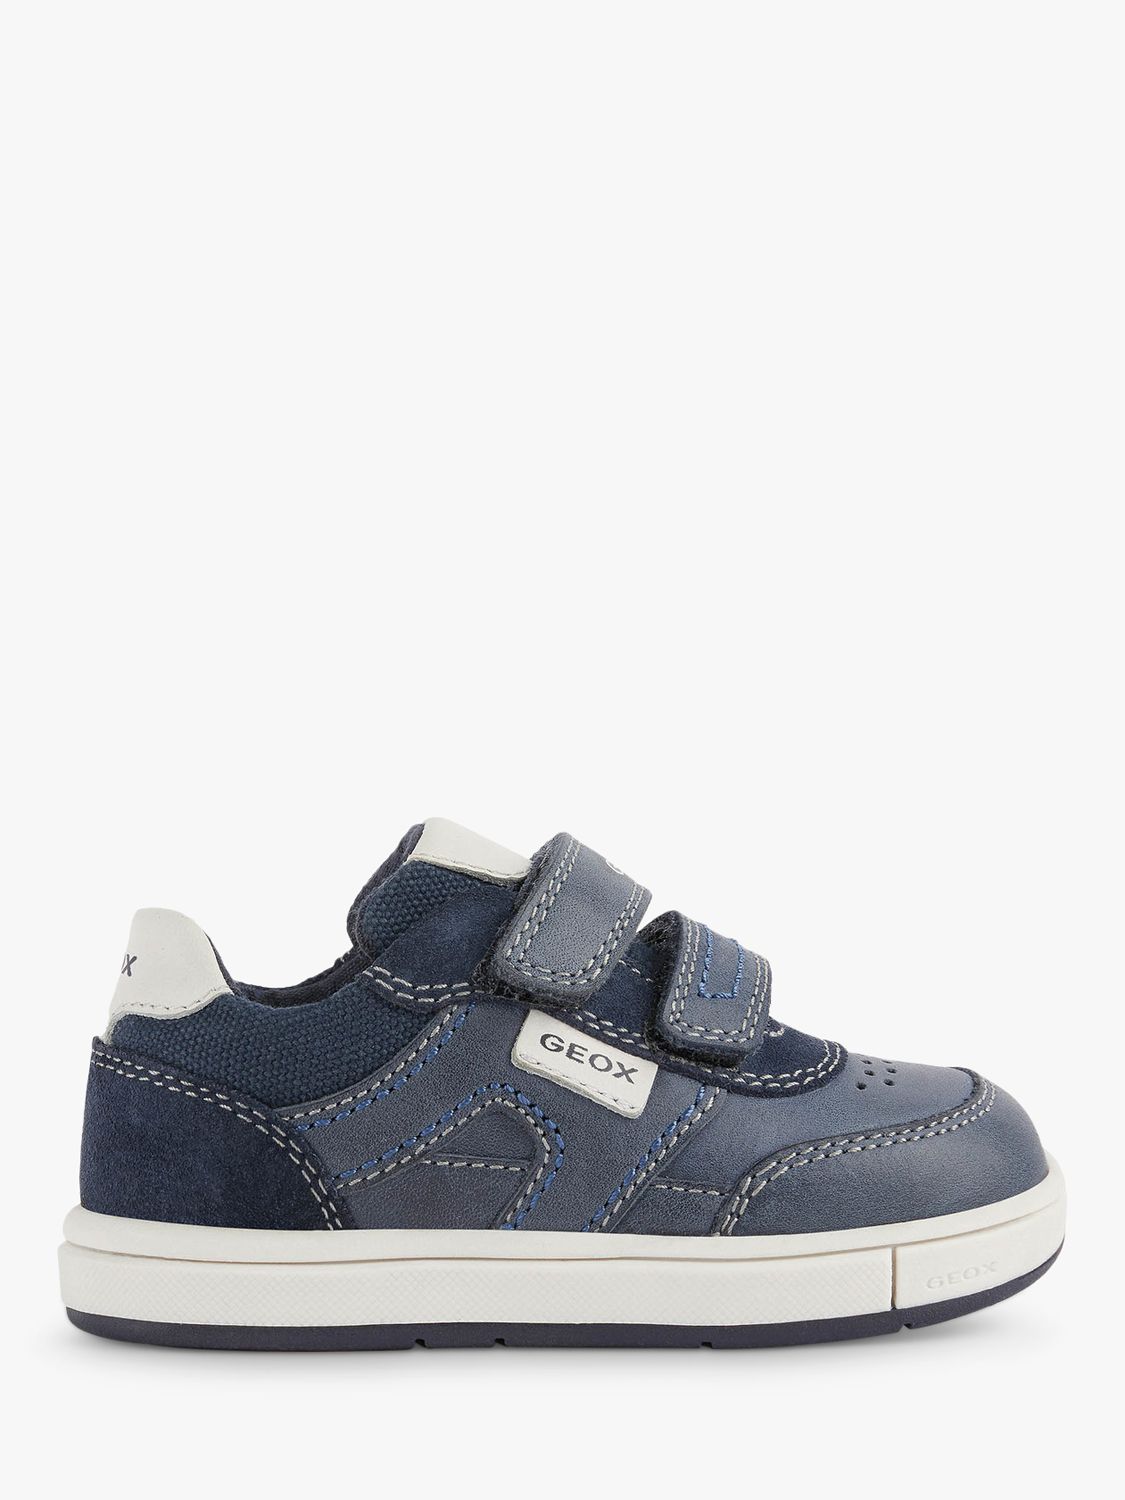 Junior Trottola Leather Pre-Walker Trainers at John & Partners